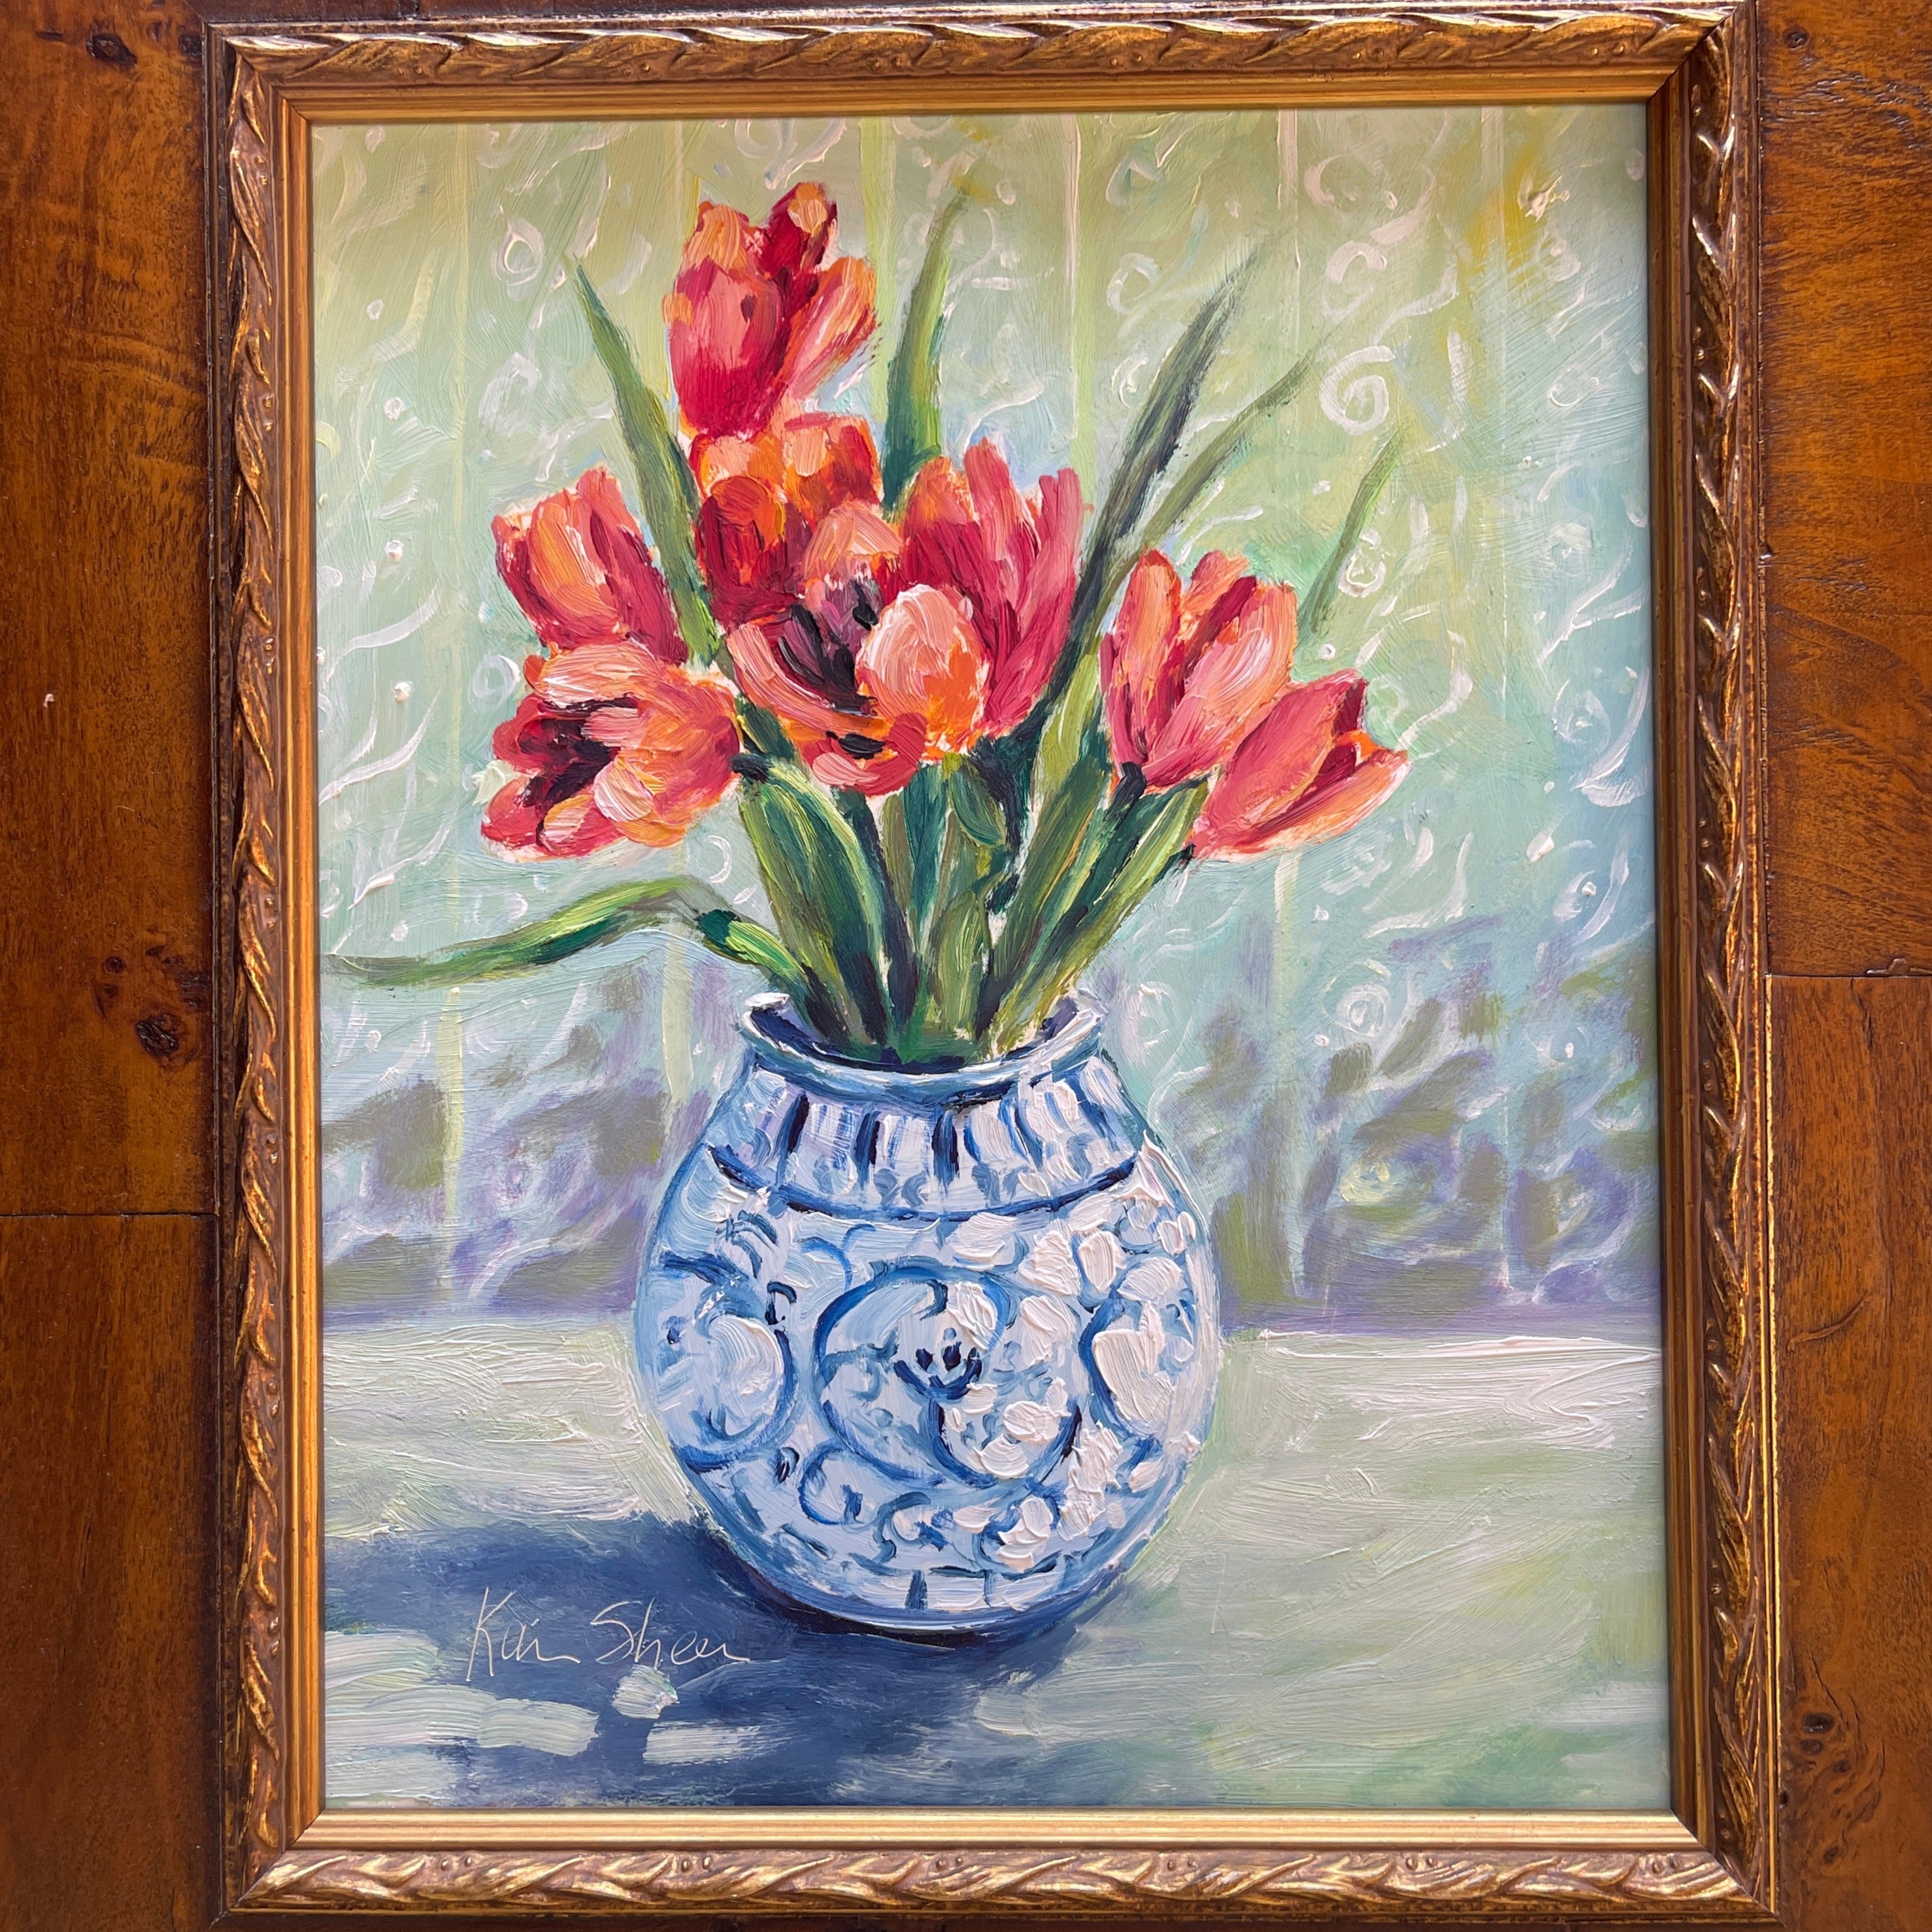 "Tulips in a Blue & White Vase" by Karin Sheer